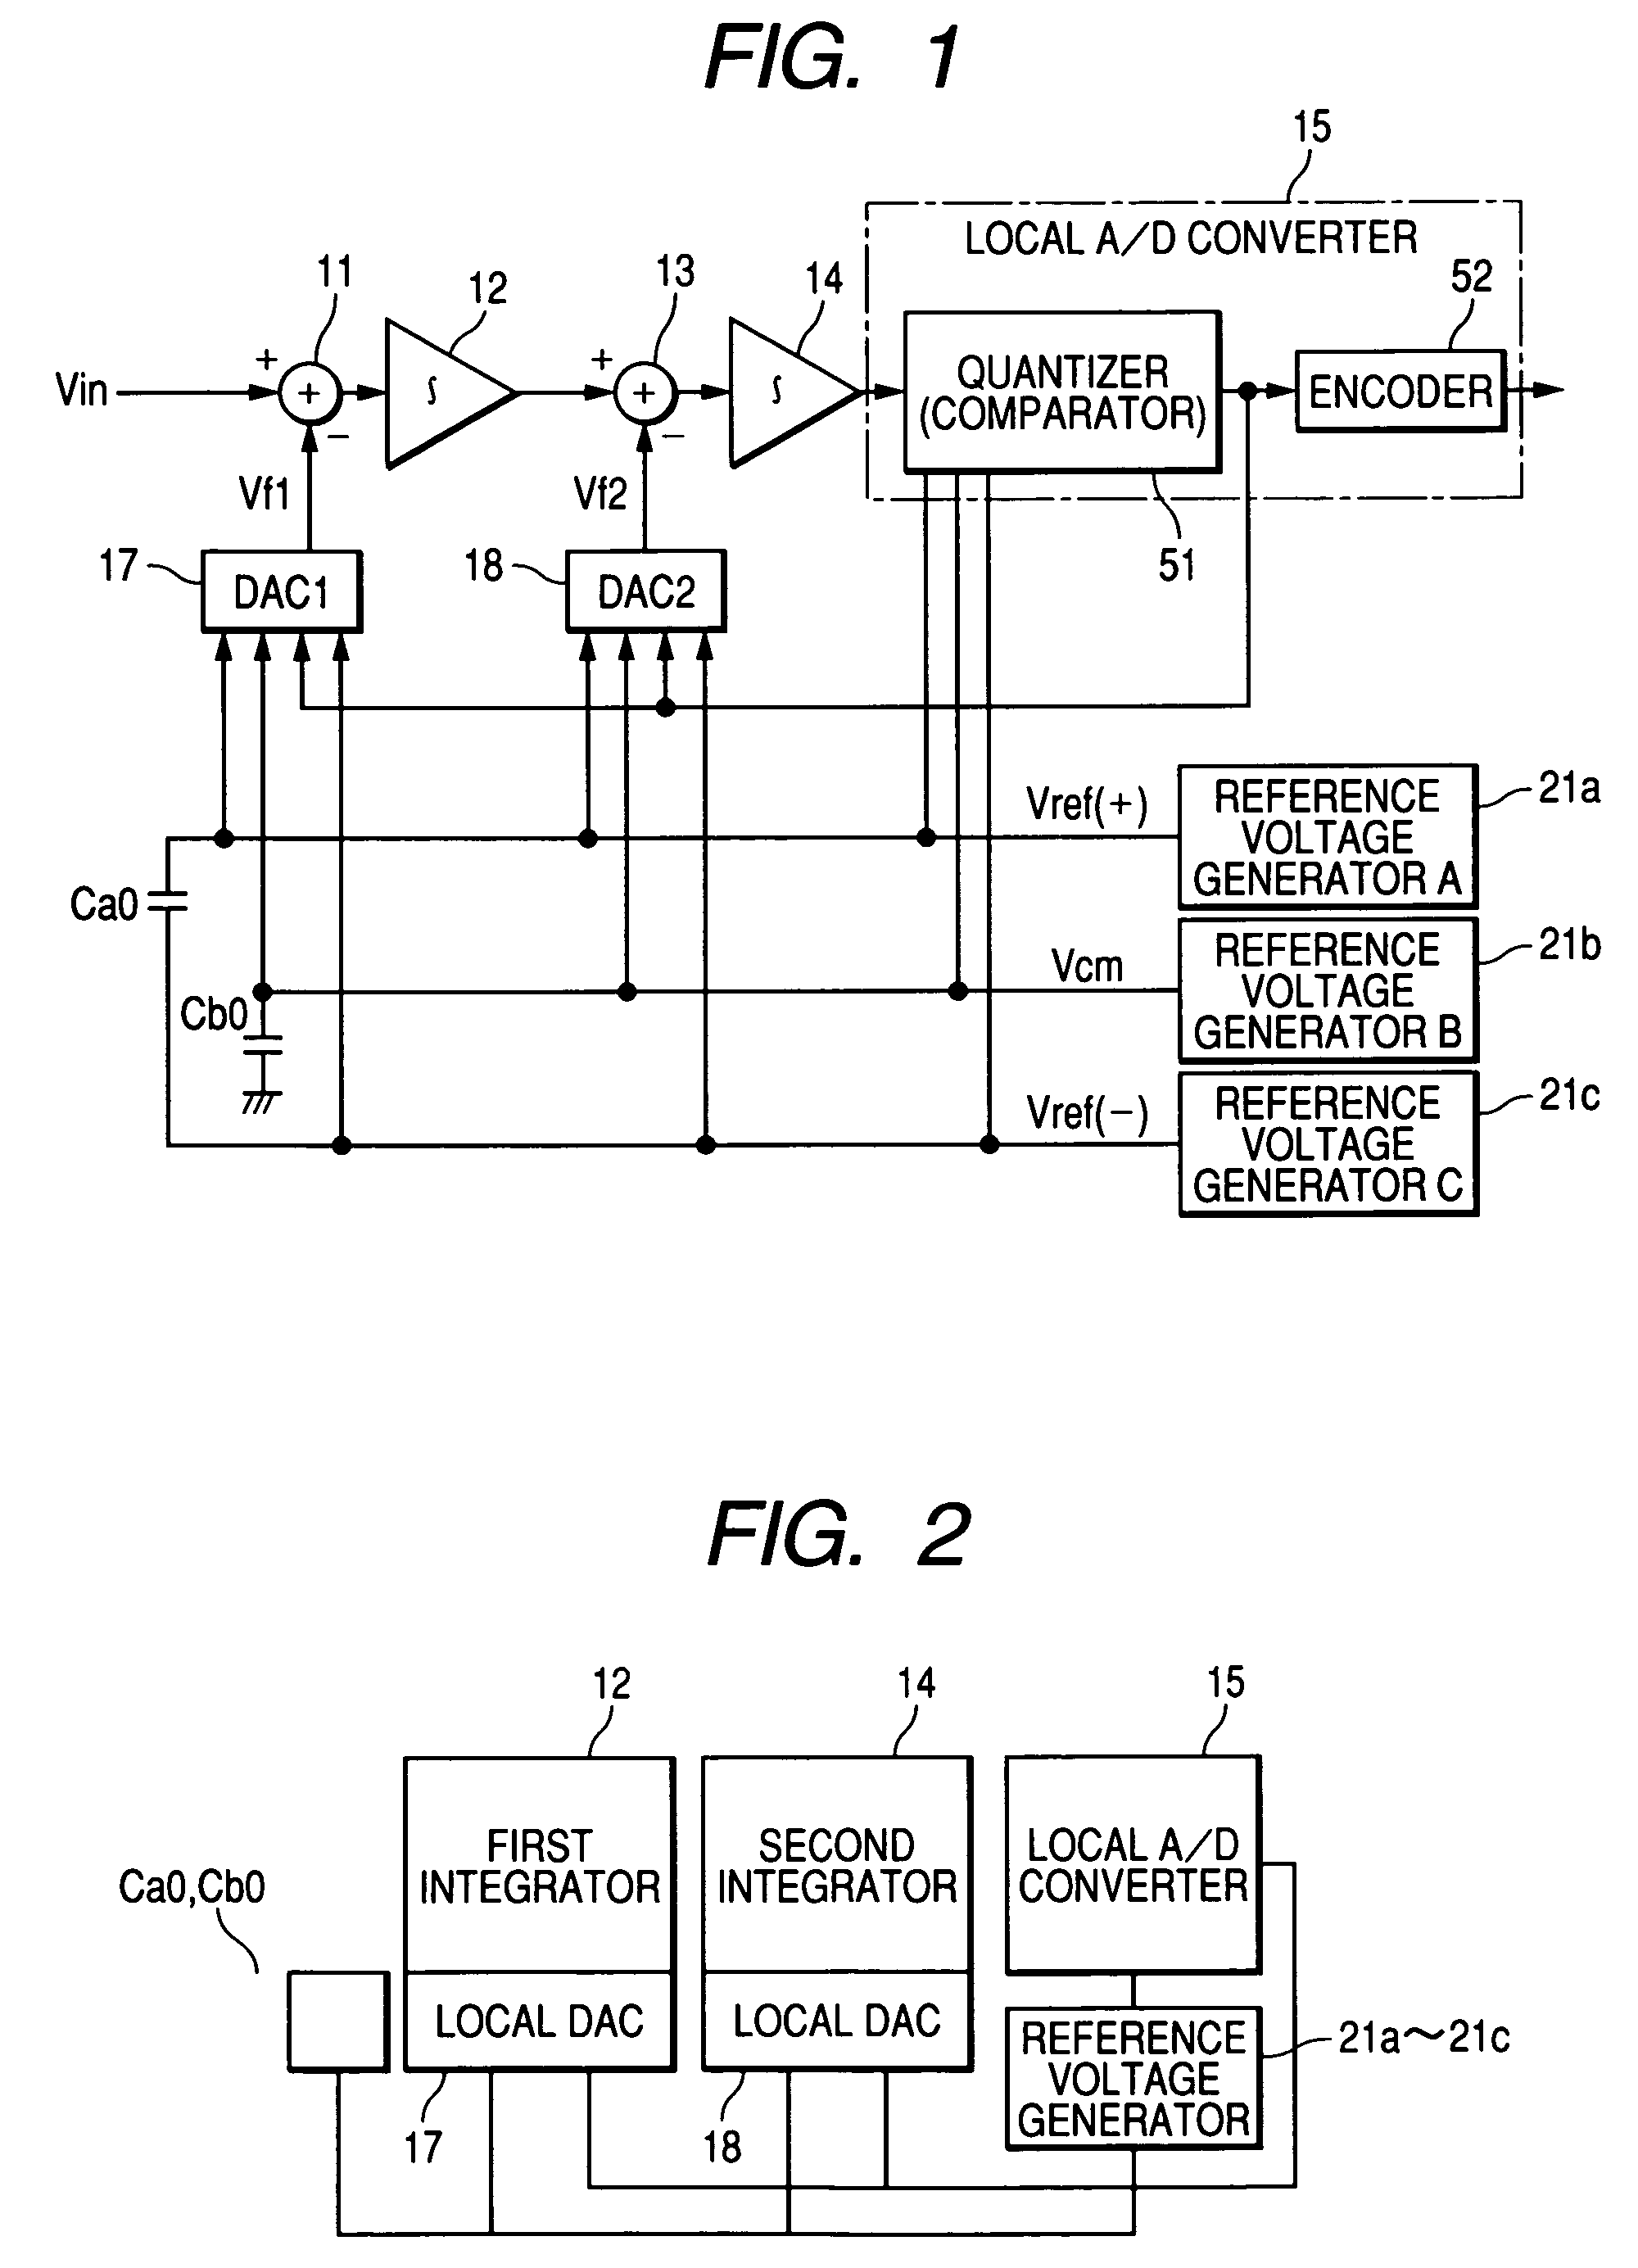 Semiconductor integrated circuit for communication including analog-to-digital conversion circuit